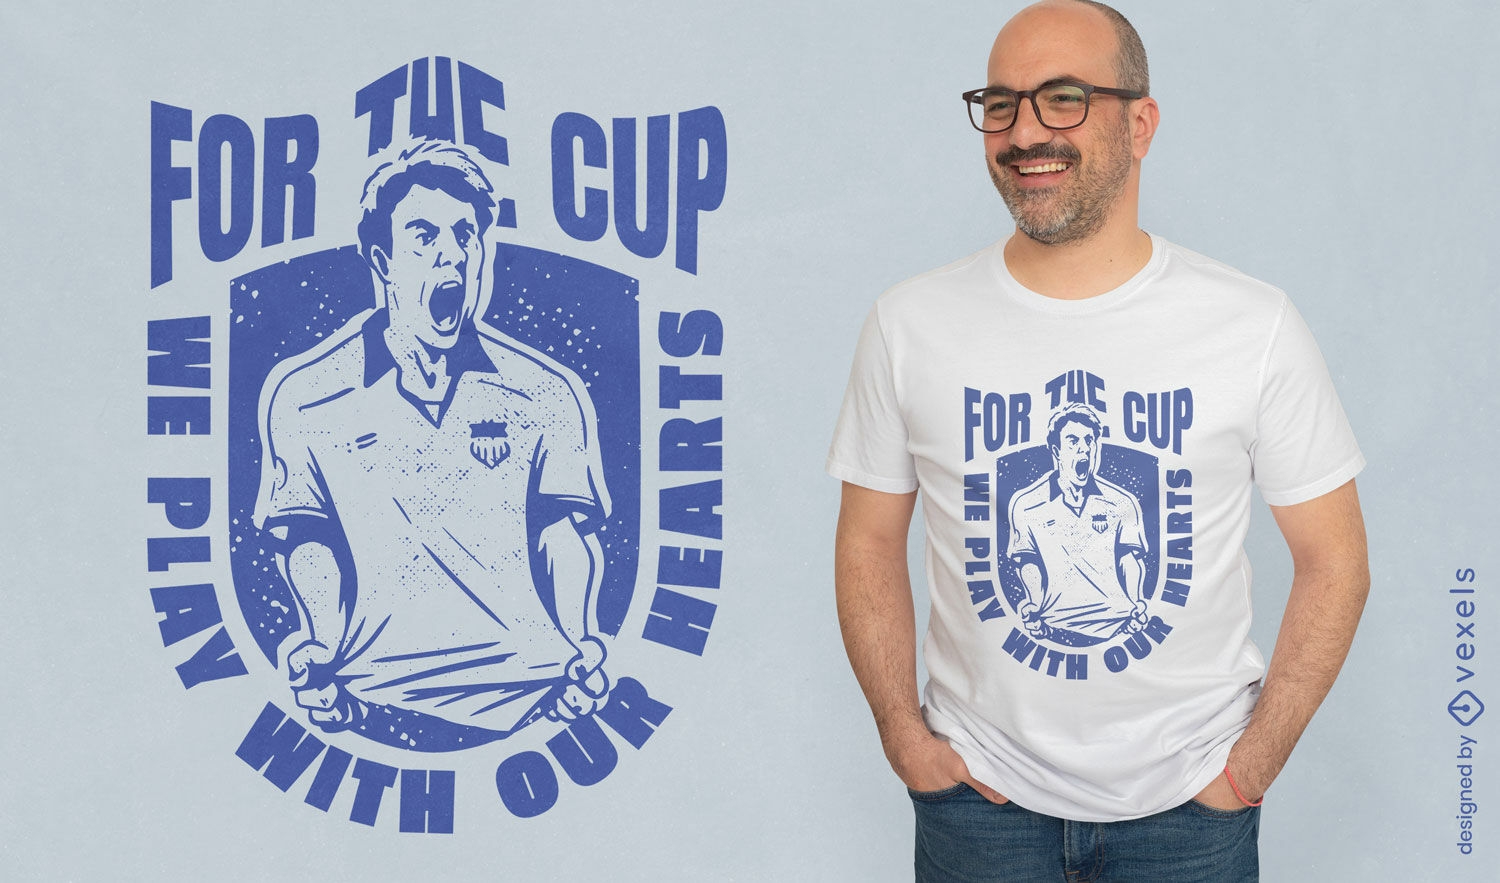 For the cup soccer player Qatar t-shirt design